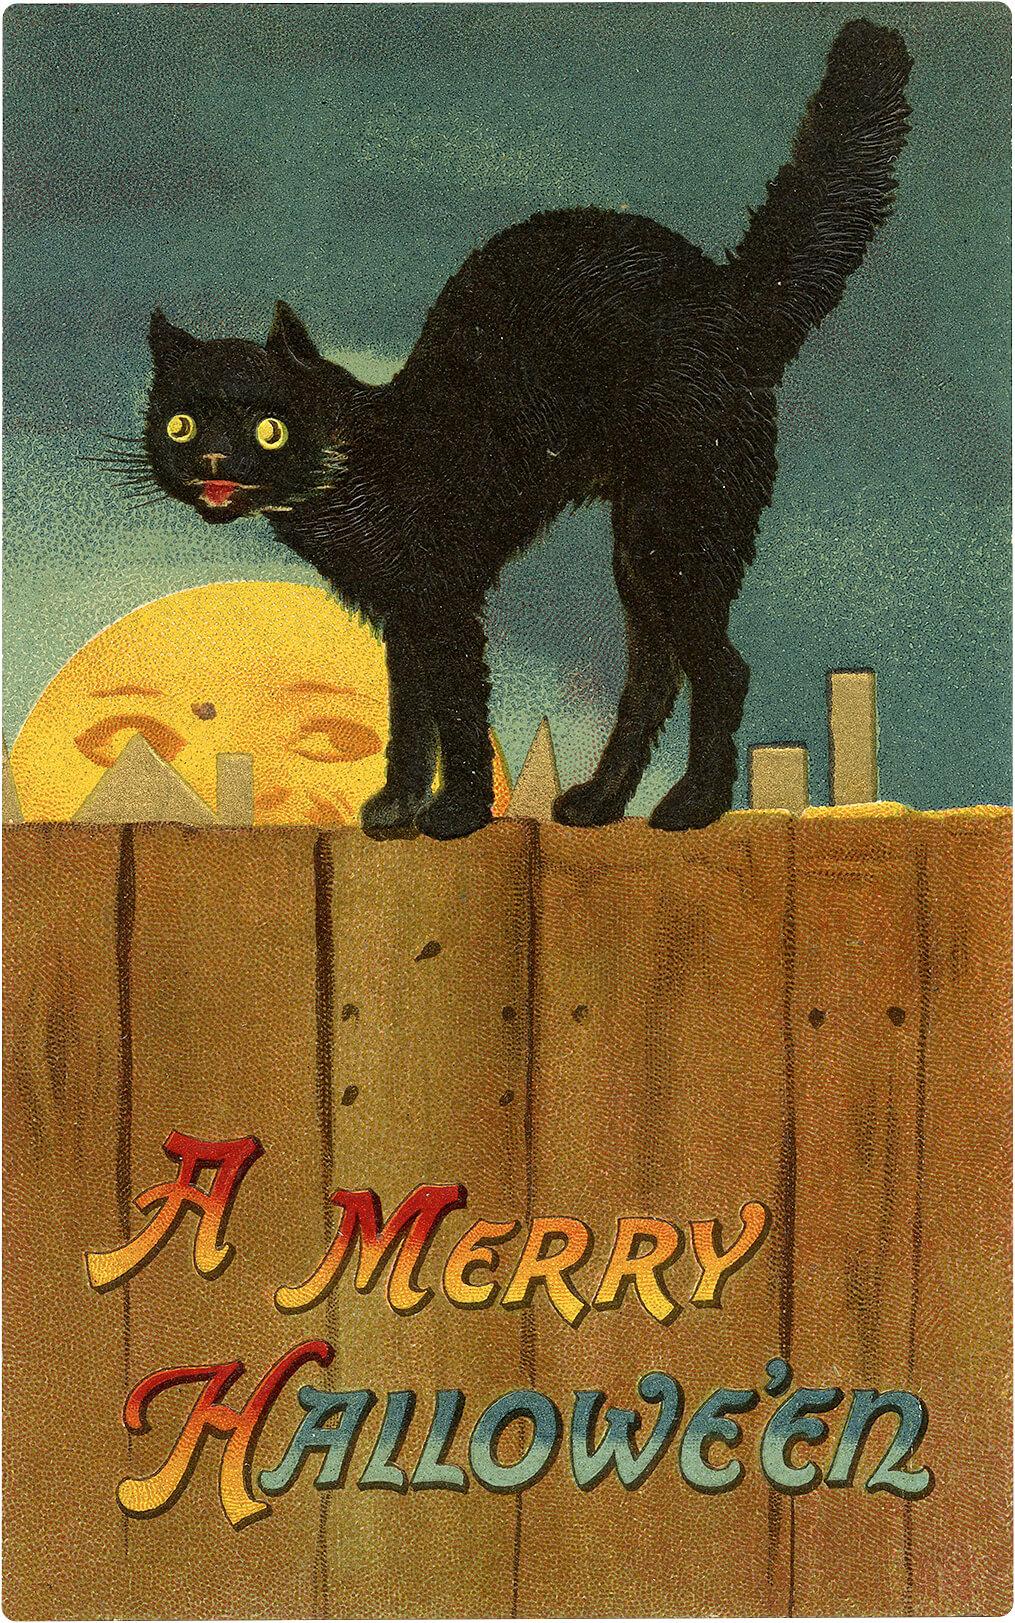 Vintage Halloween Card of Black Cat and Moon - Mad Halloween - History of Black Cats, Bad Luck, Witches and Halloween